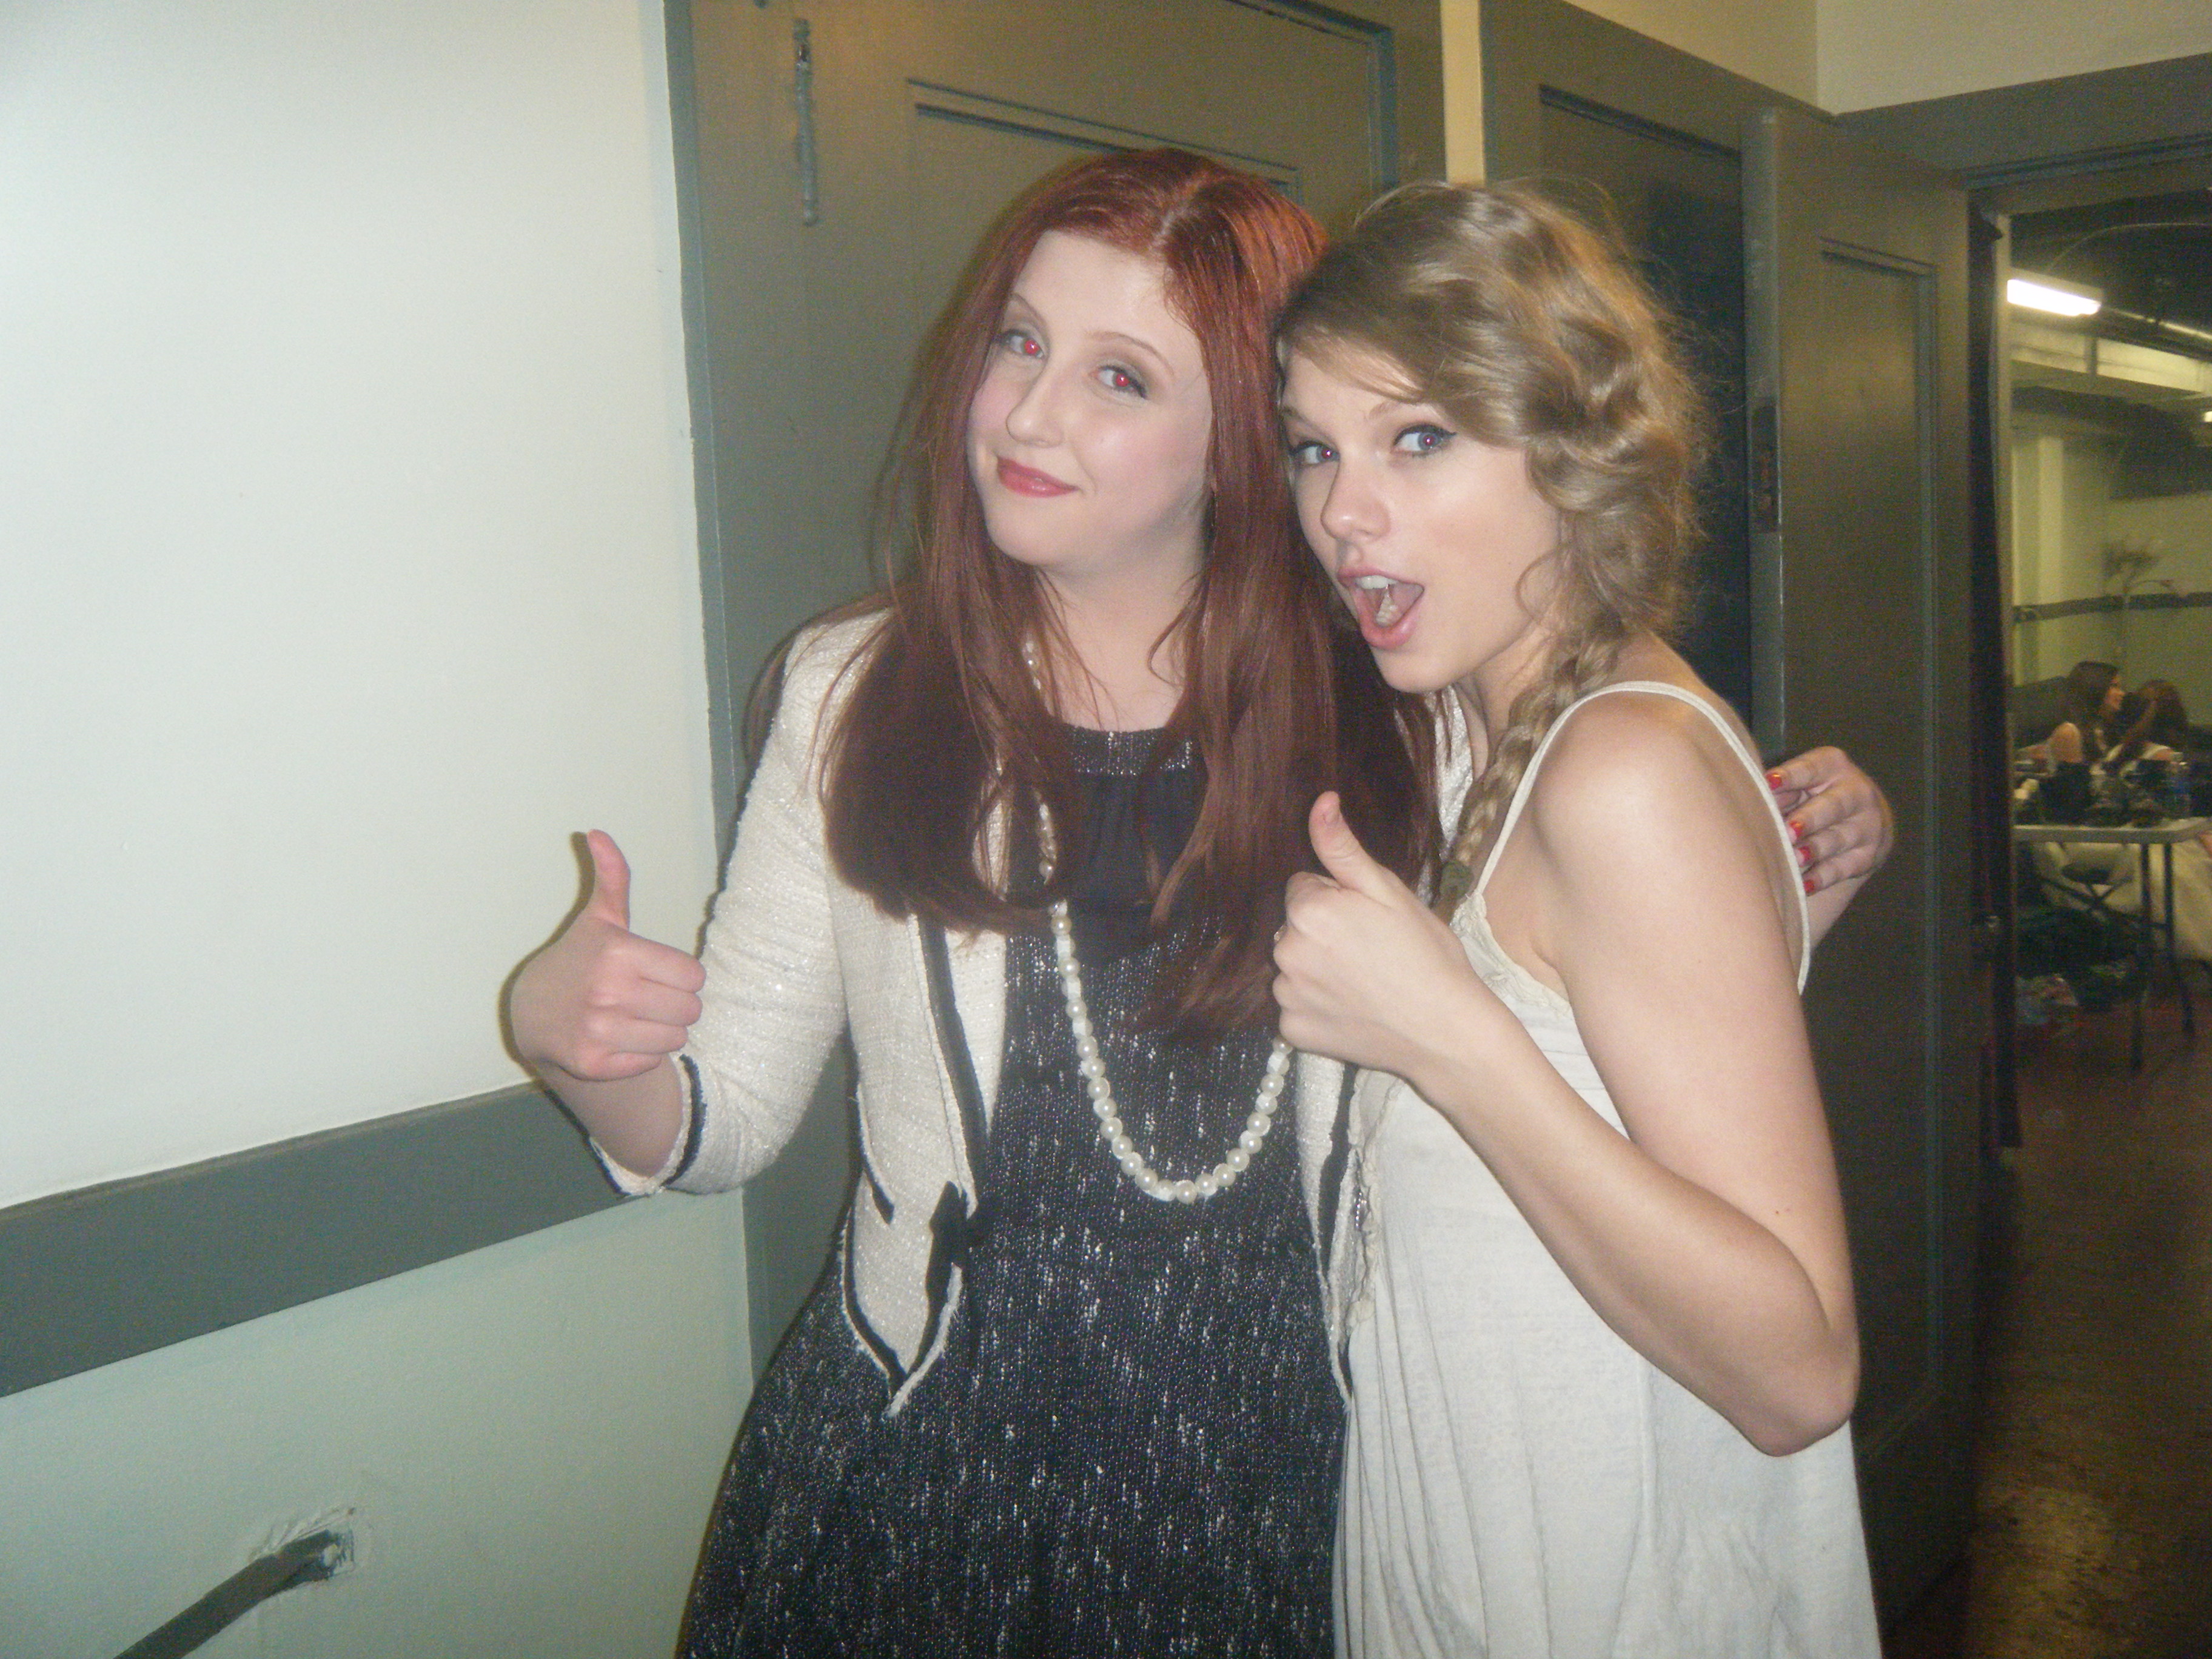 Presley Cash and Taylor Swift on the set of the Mean music video shoot!!! :)